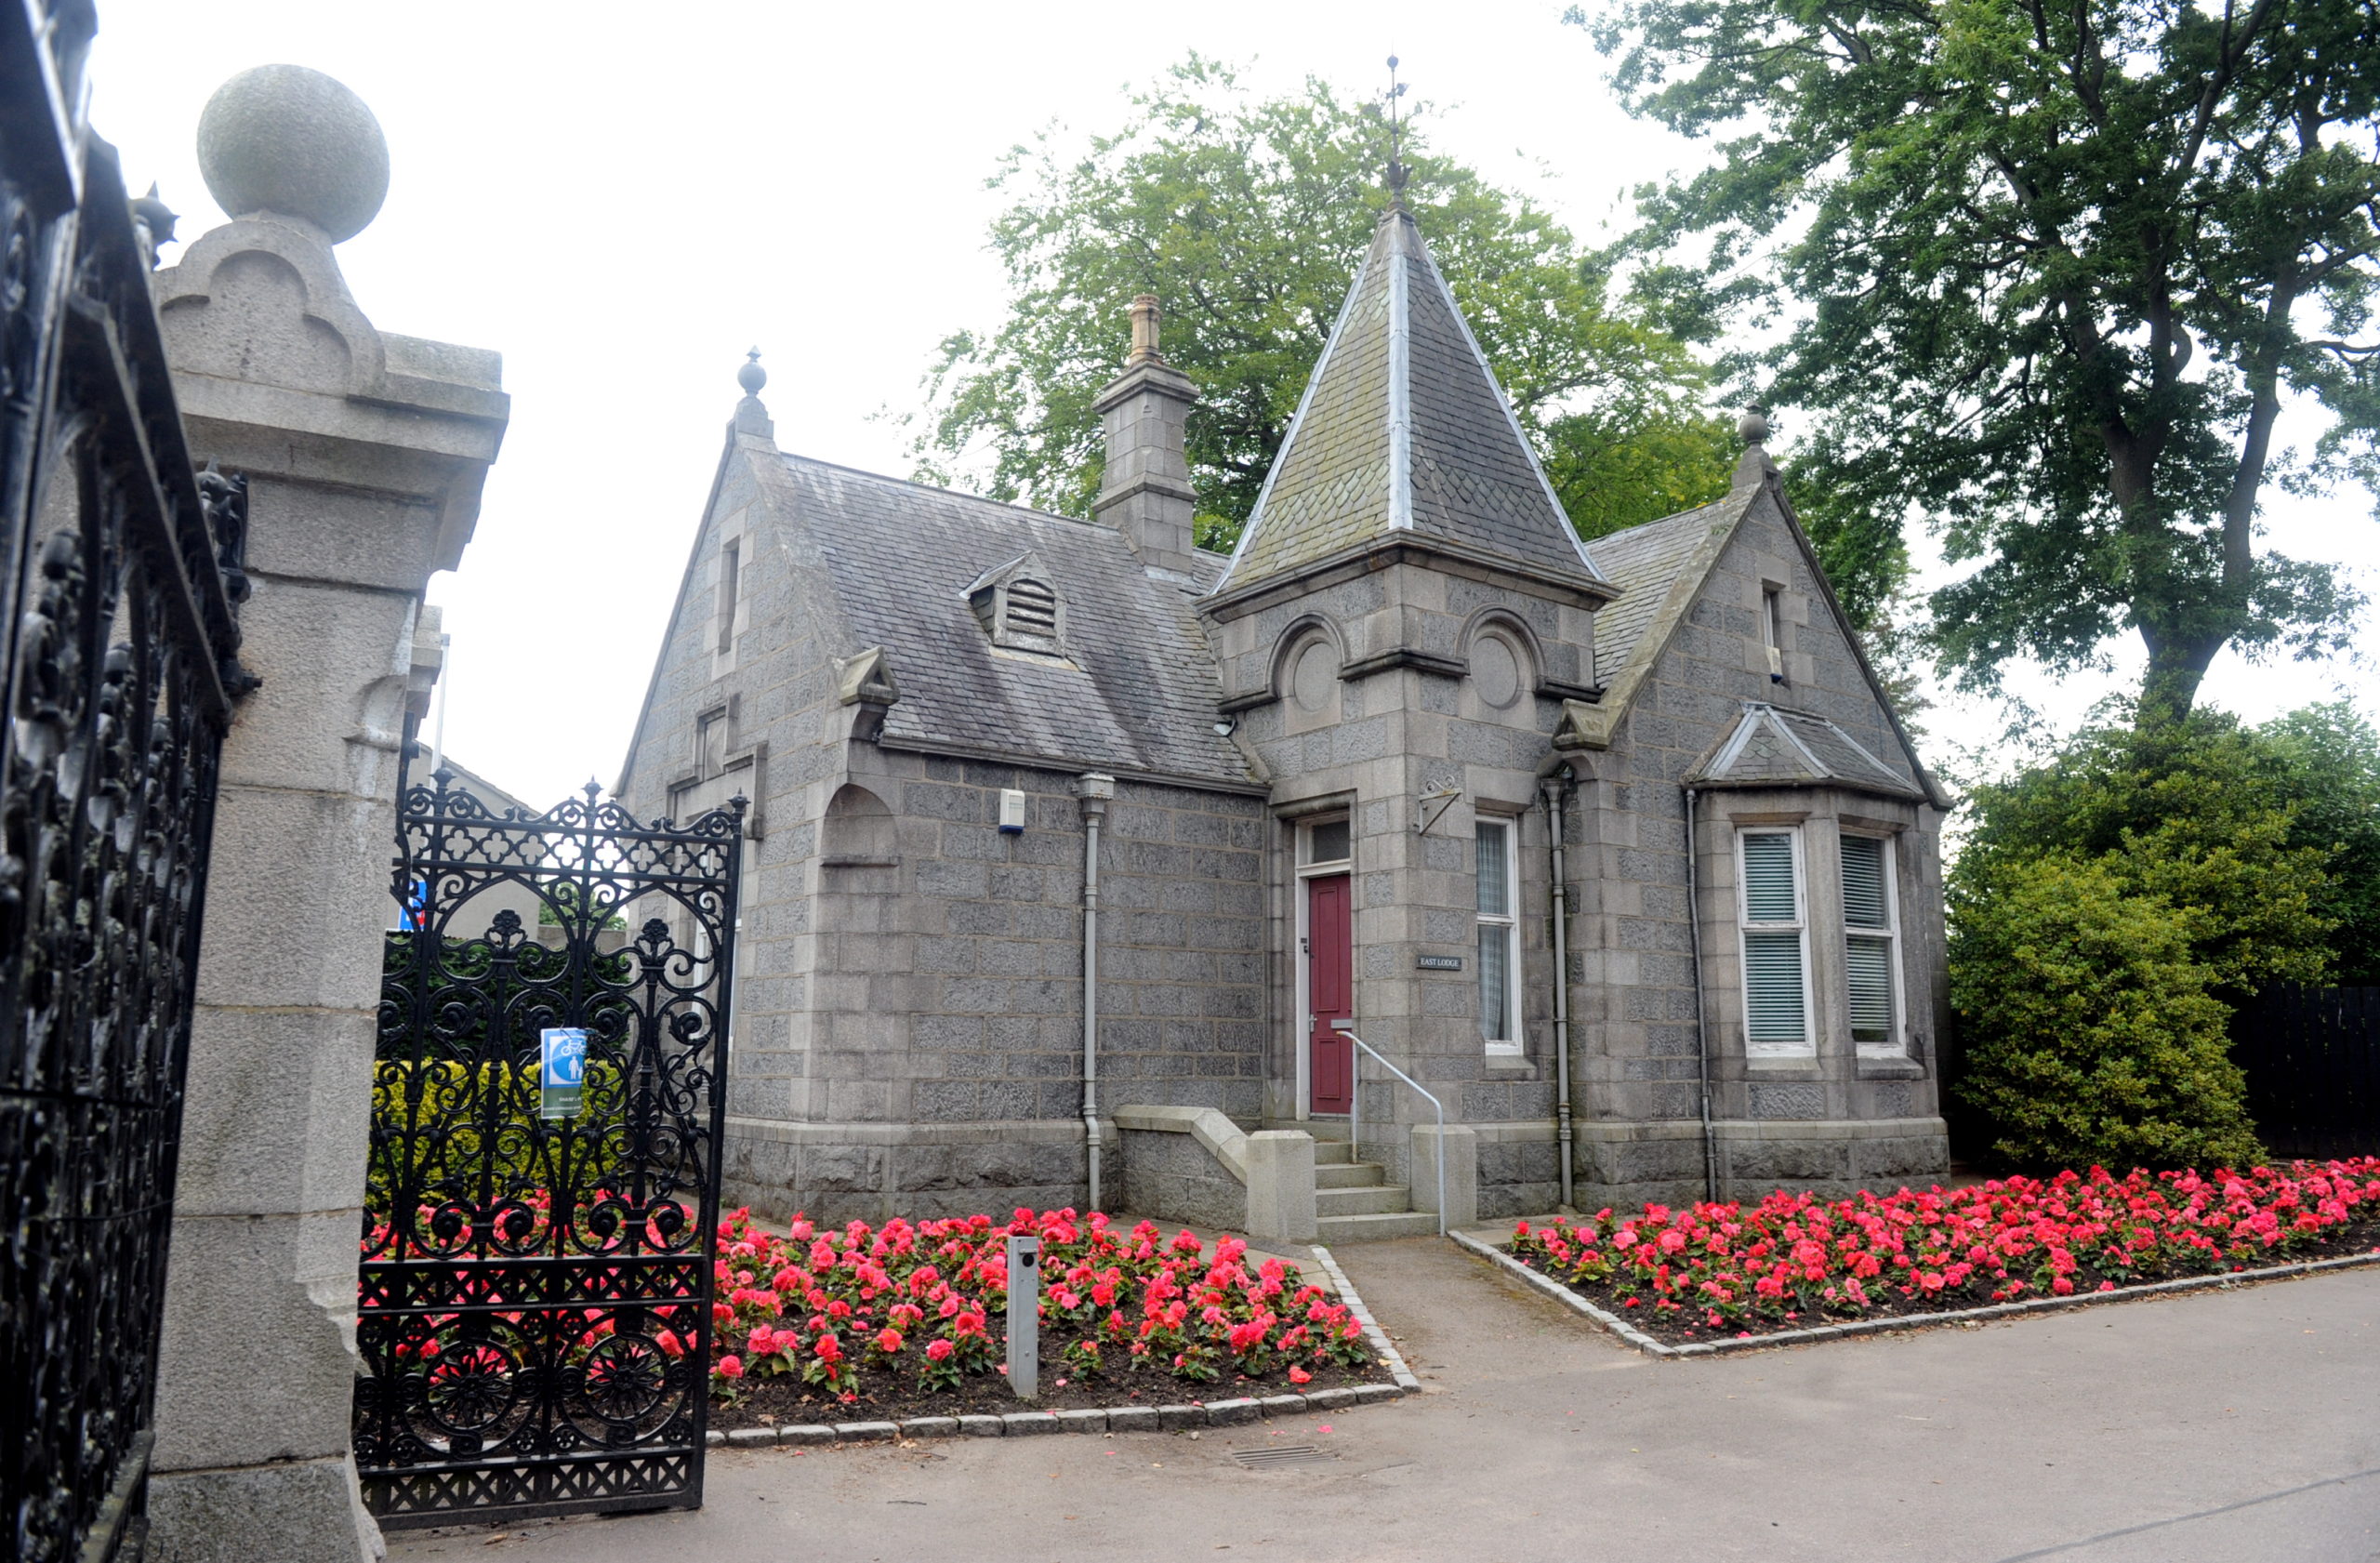 The East Gate Lodge in Duthie Park, Aberdeen which will be converted to house an outdoor nursery over the next year.